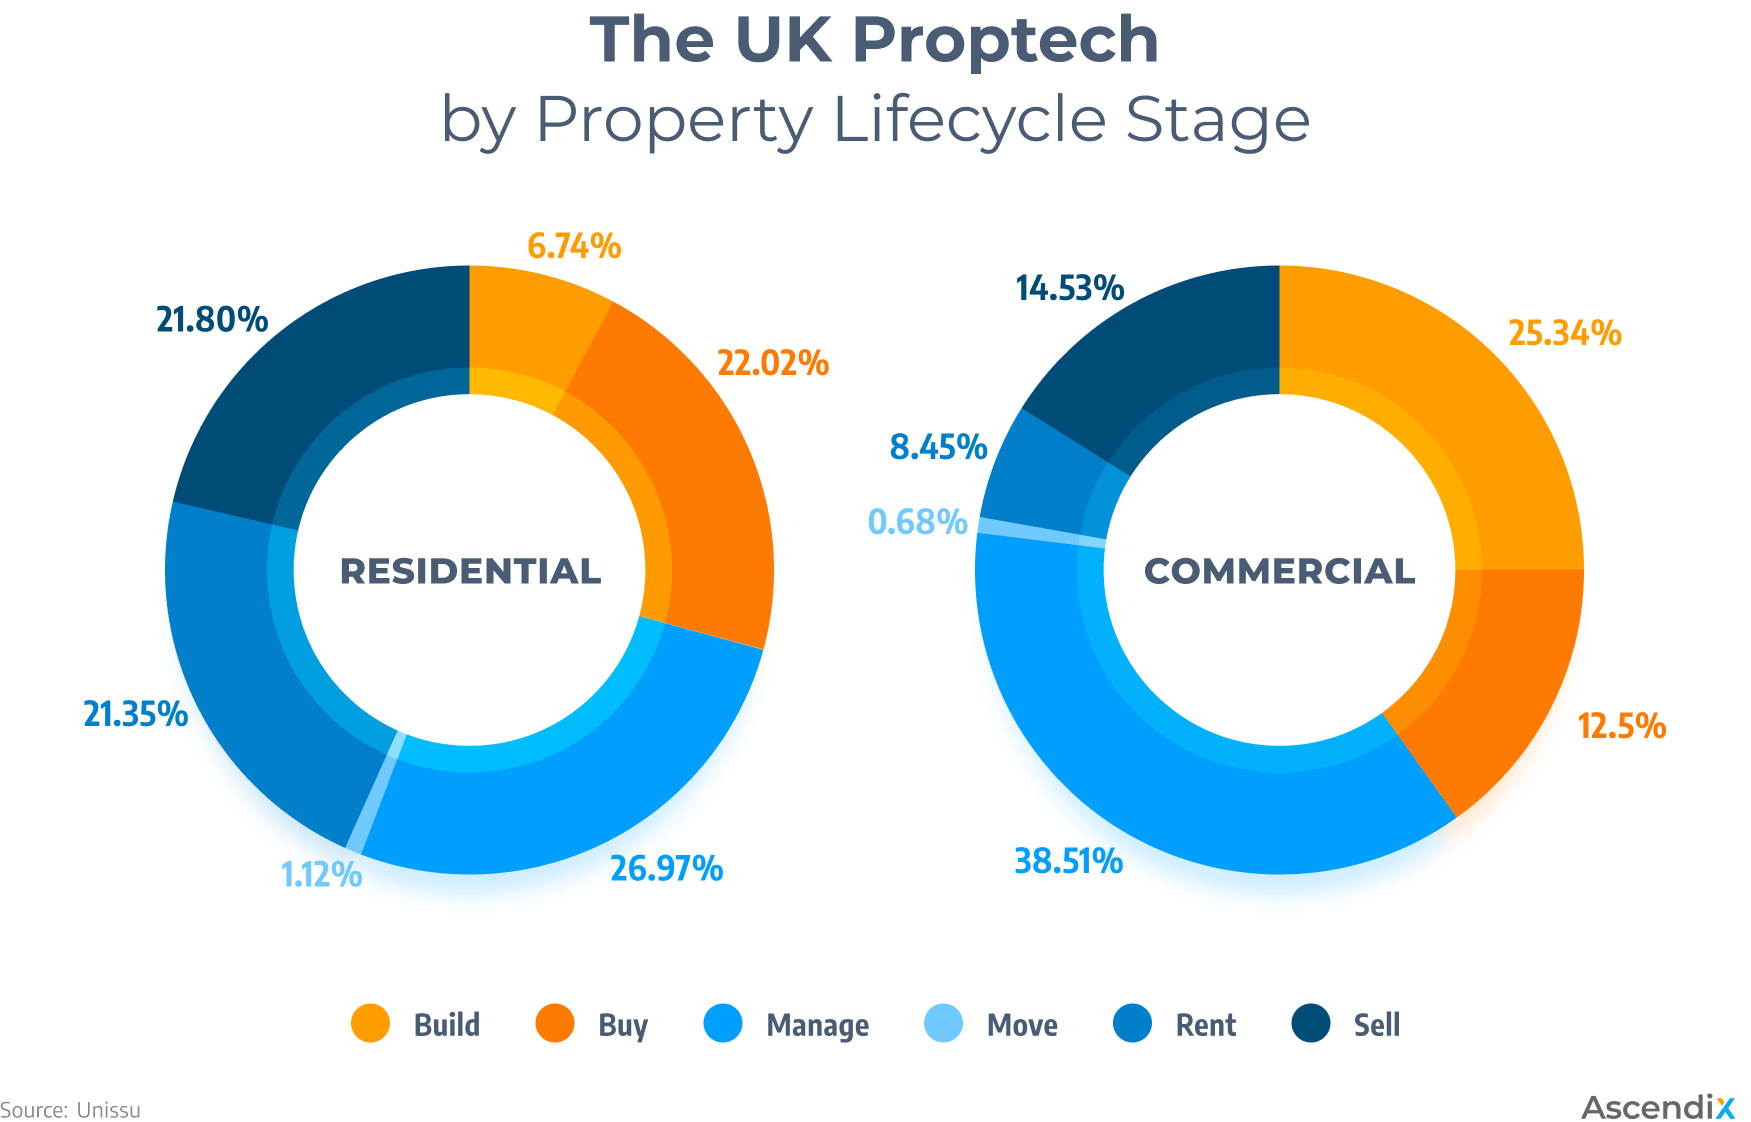 The UK Proptech Software Market by Property Lifecycle Stage